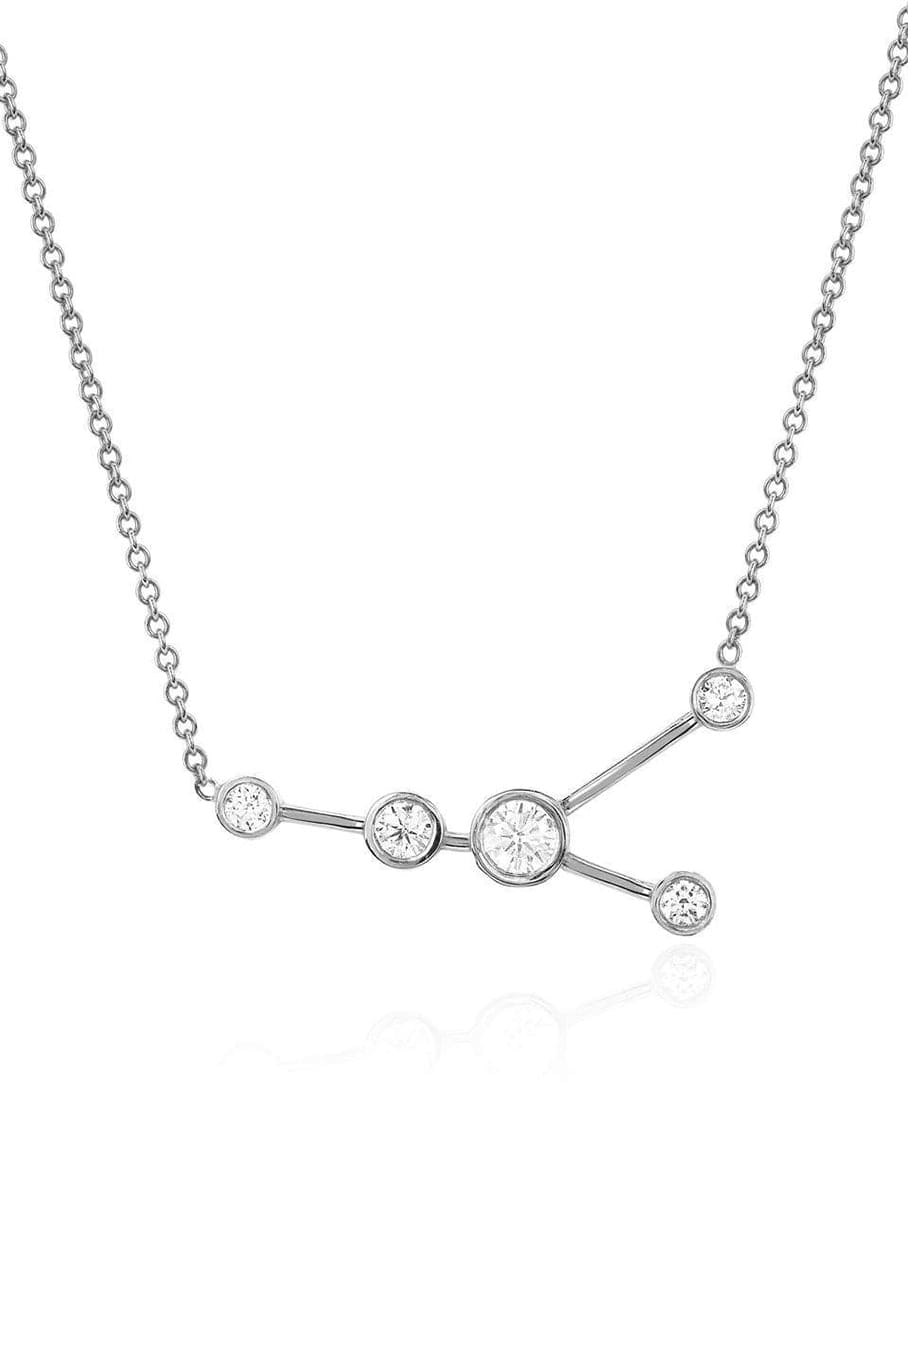 LOGAN HOLLOWELL-Cancer Constellation Necklace-